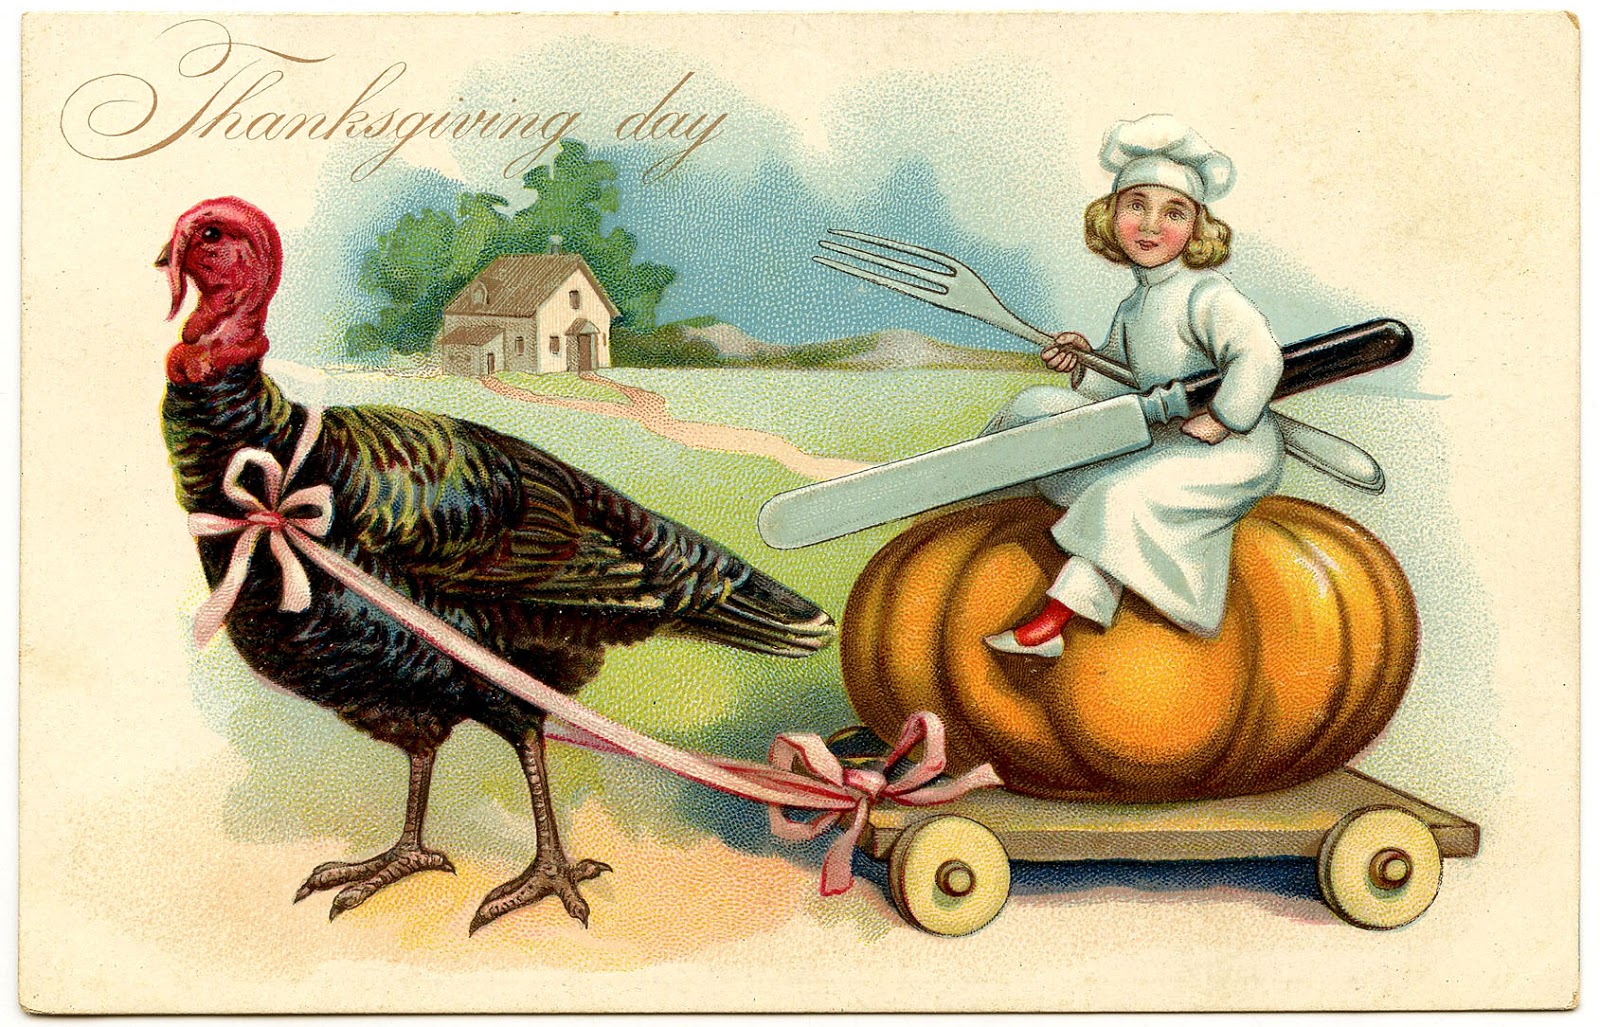 Vintage Thanksgiving Image - Chef with Turkey - The ...